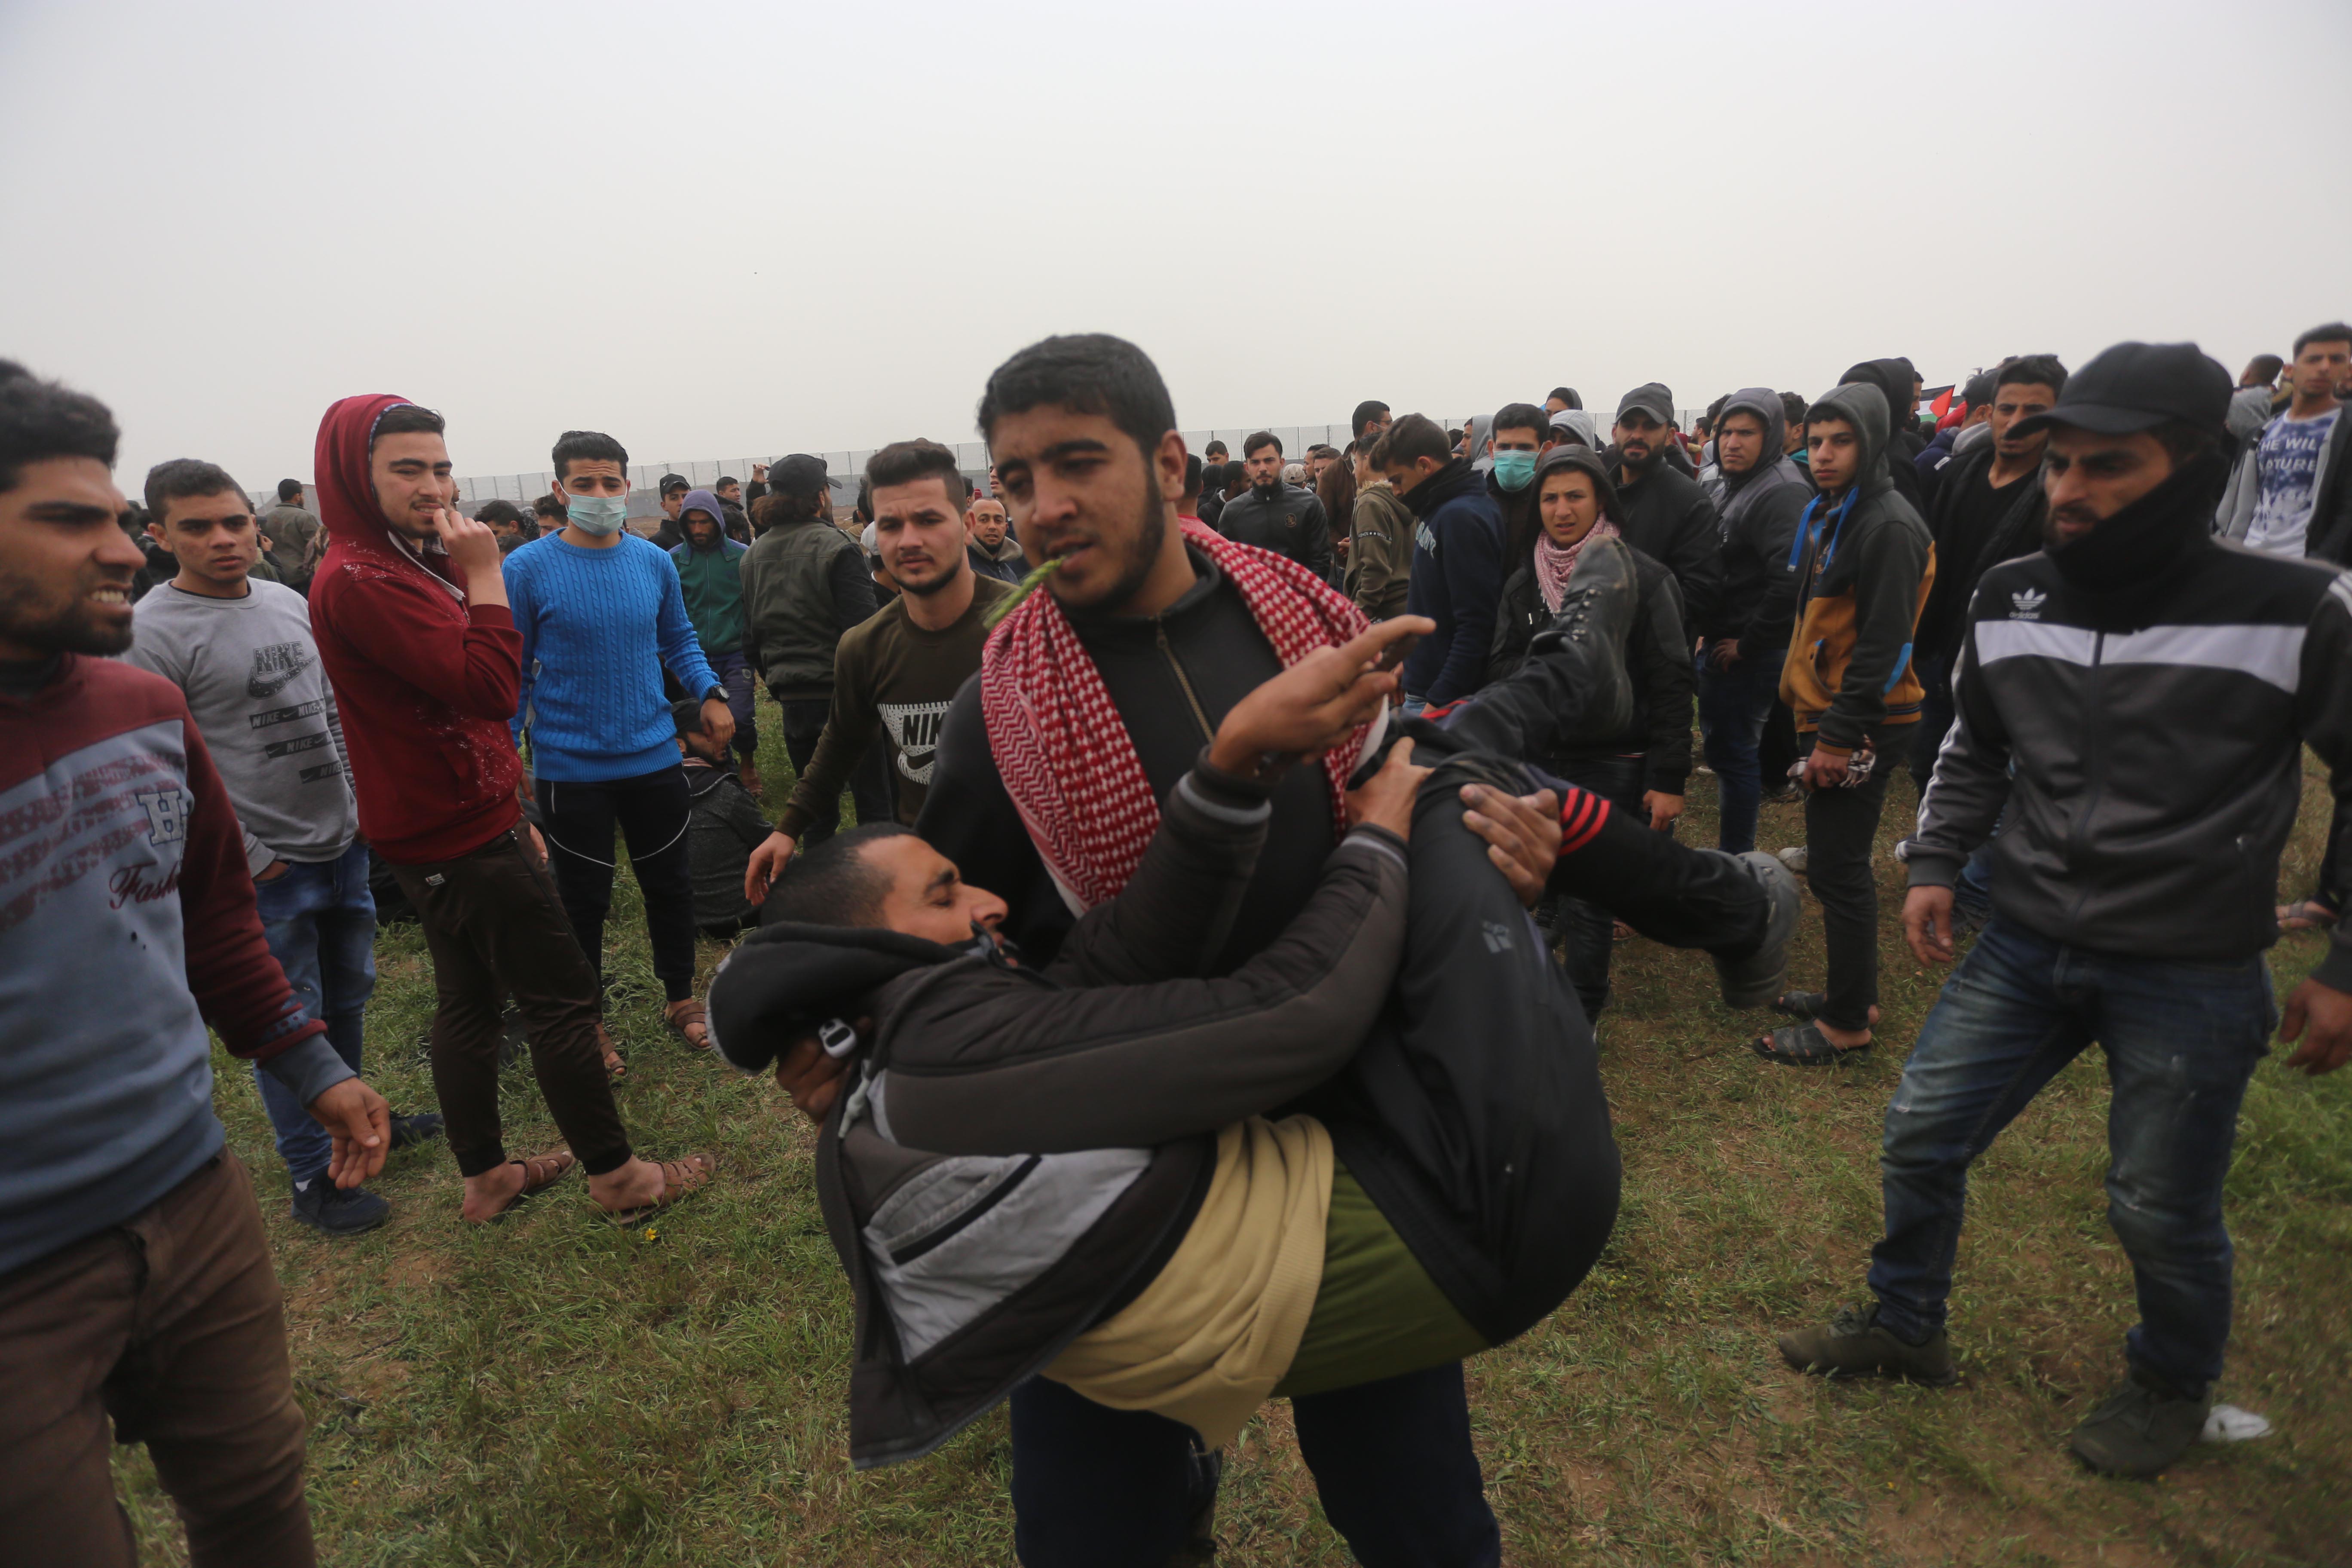 A Palestinian man carried a wounded protester to safety in the Gaza Strip (MEE/Mohamed Asad)